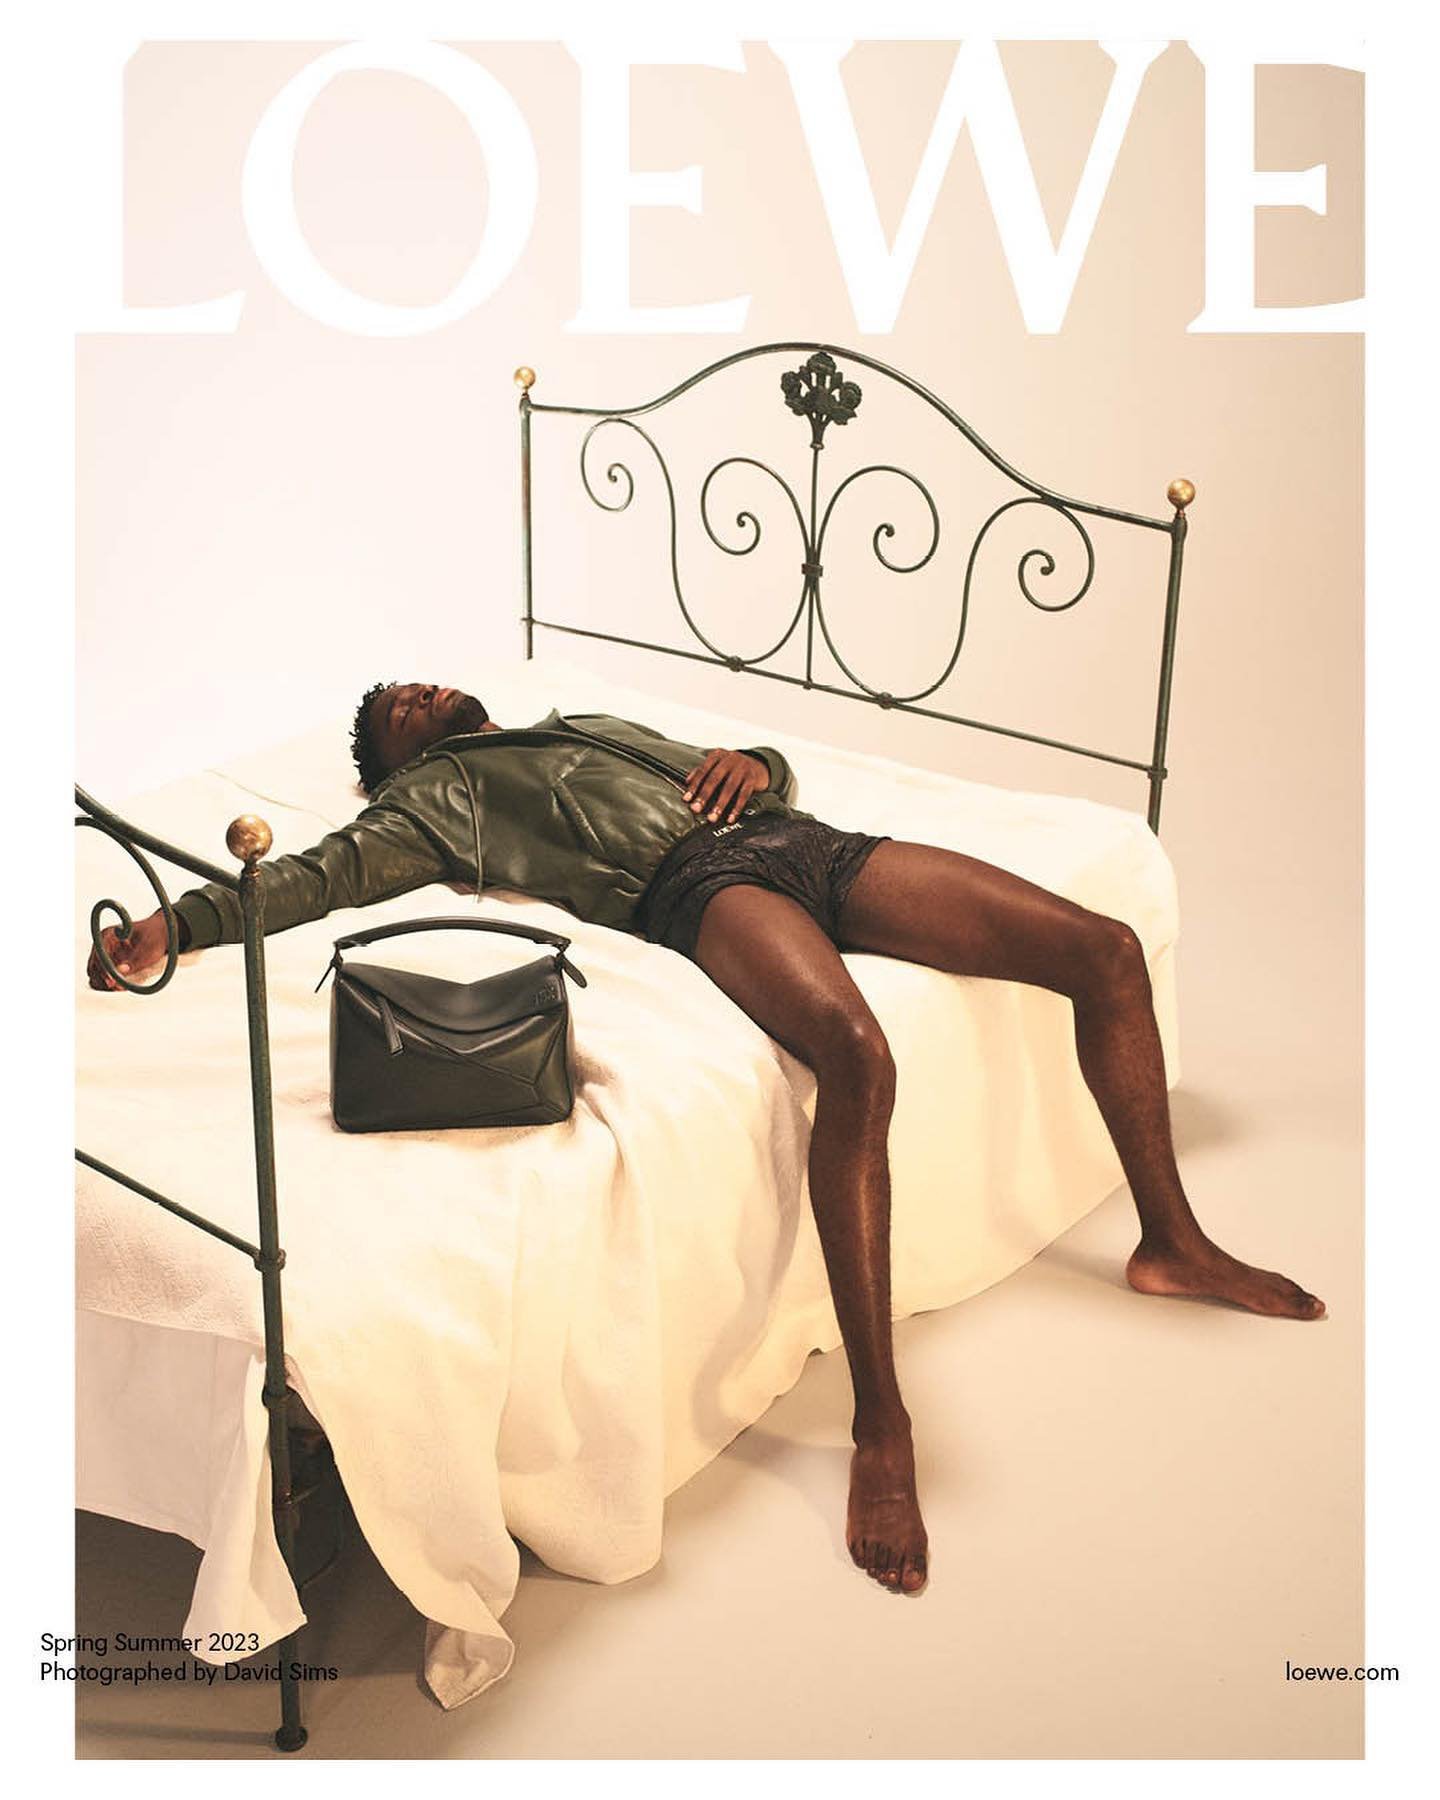 Loewe Spring Summer 2023 Men's Campaign by David Sims